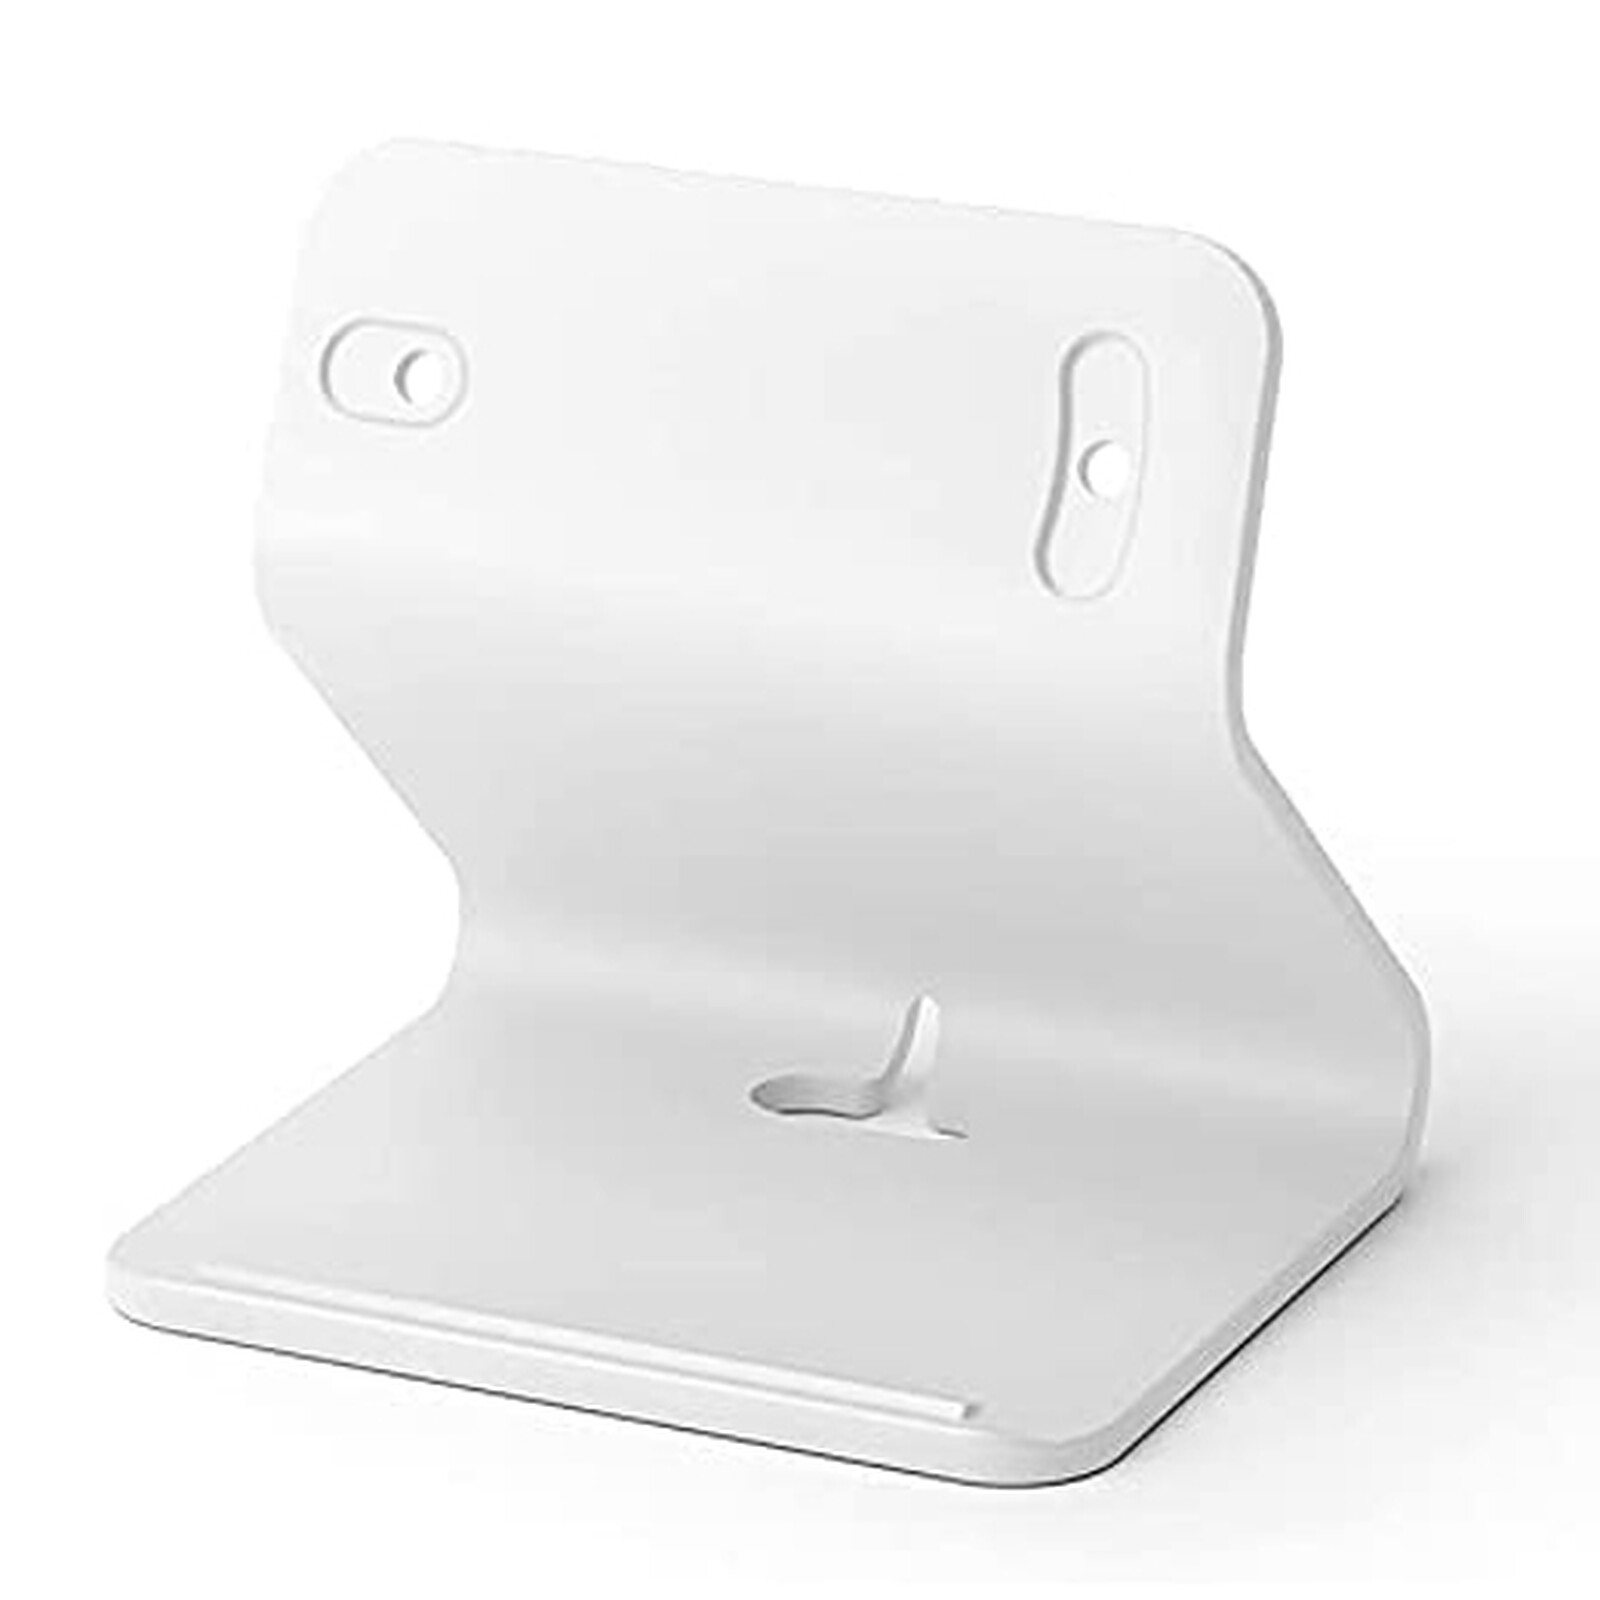 Stand for Tado Smart Thermostat, Tado Thermostat Desk Stand White P3D-Lab®